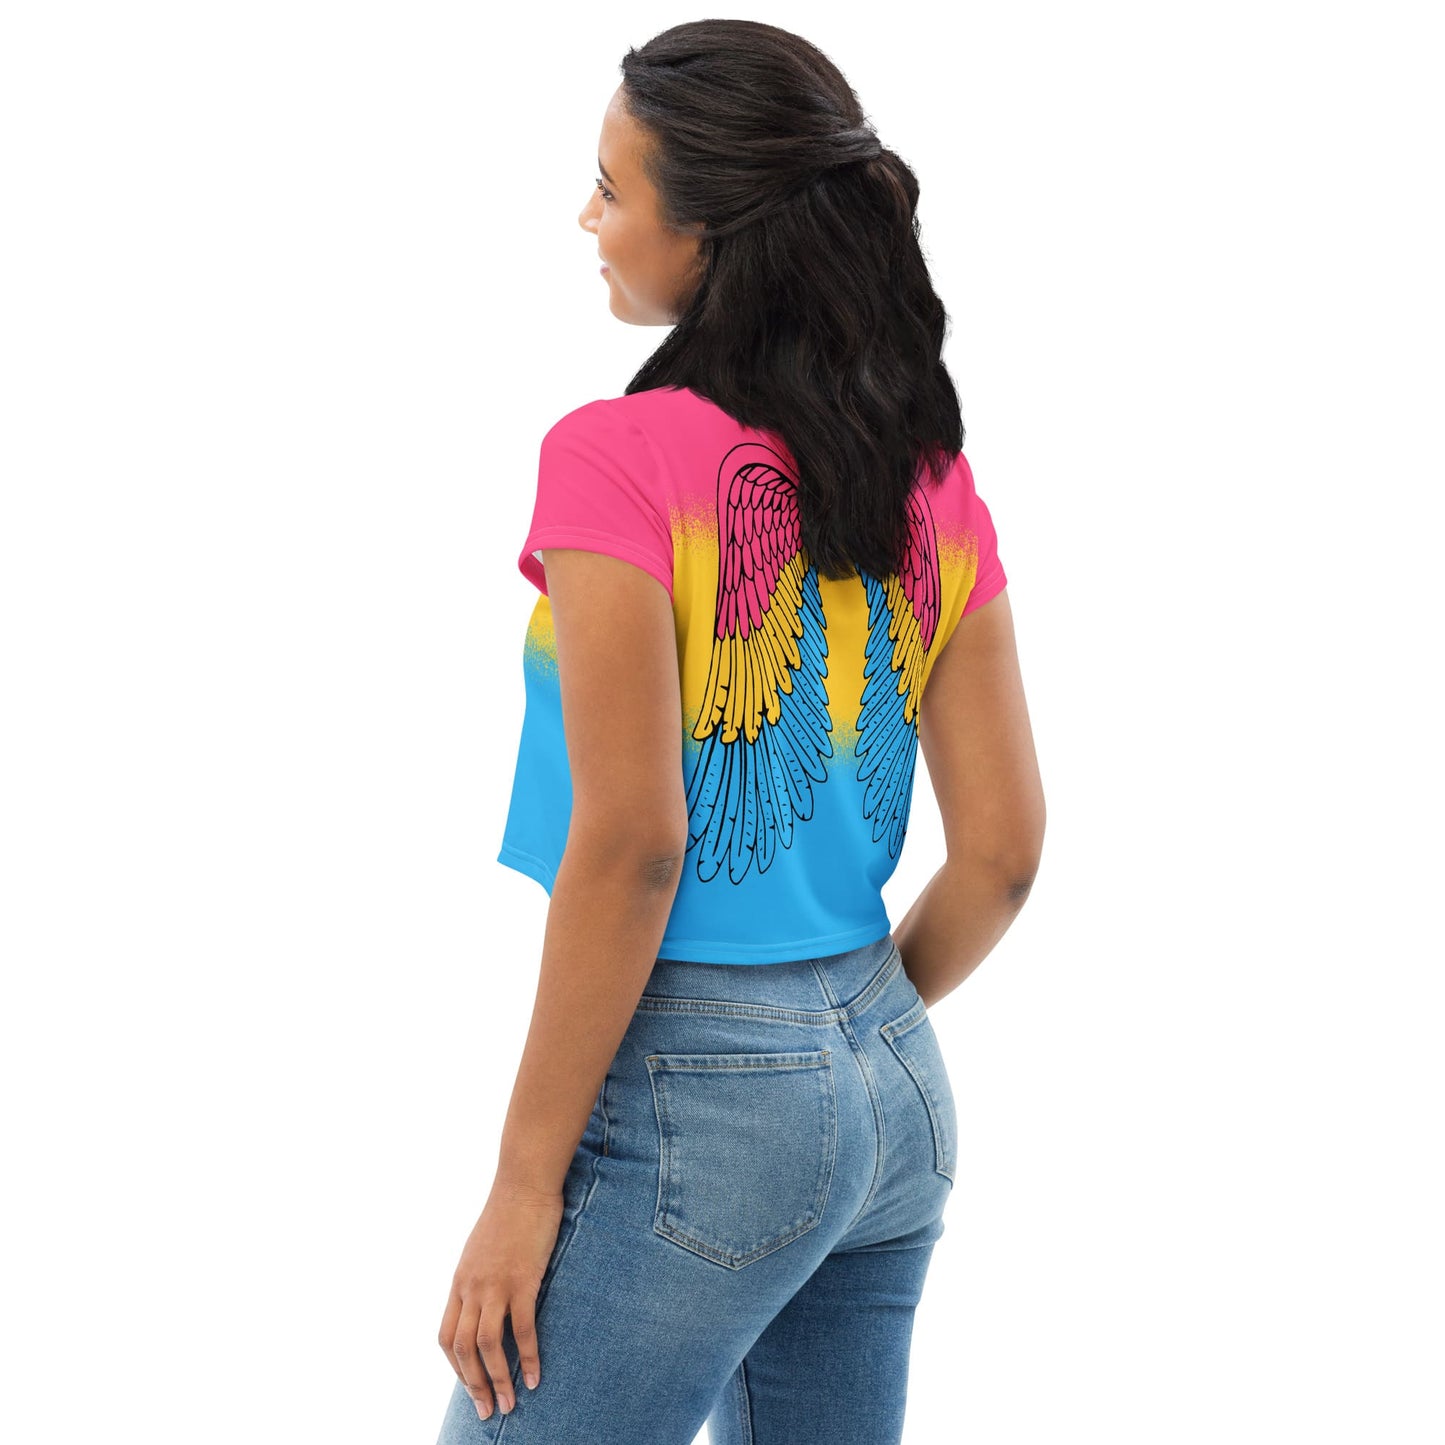 pansexual crop top, pan pride cropped shirt with wings on back, right